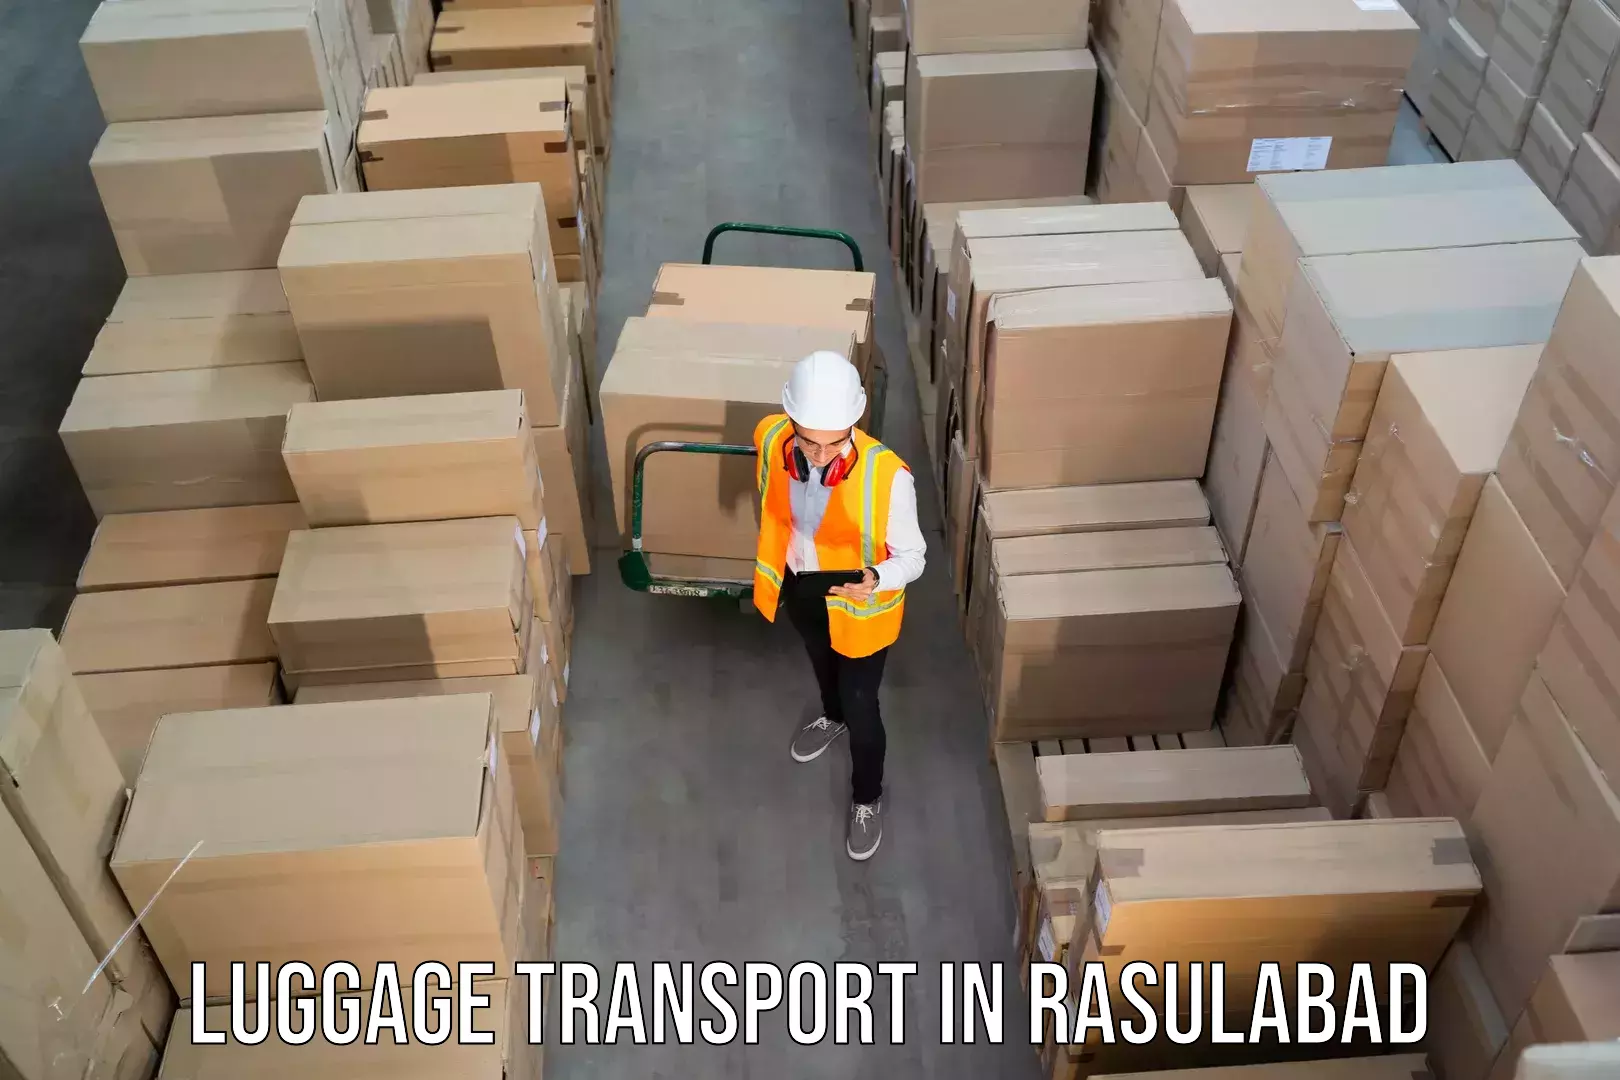 Baggage transport technology in Rasulabad